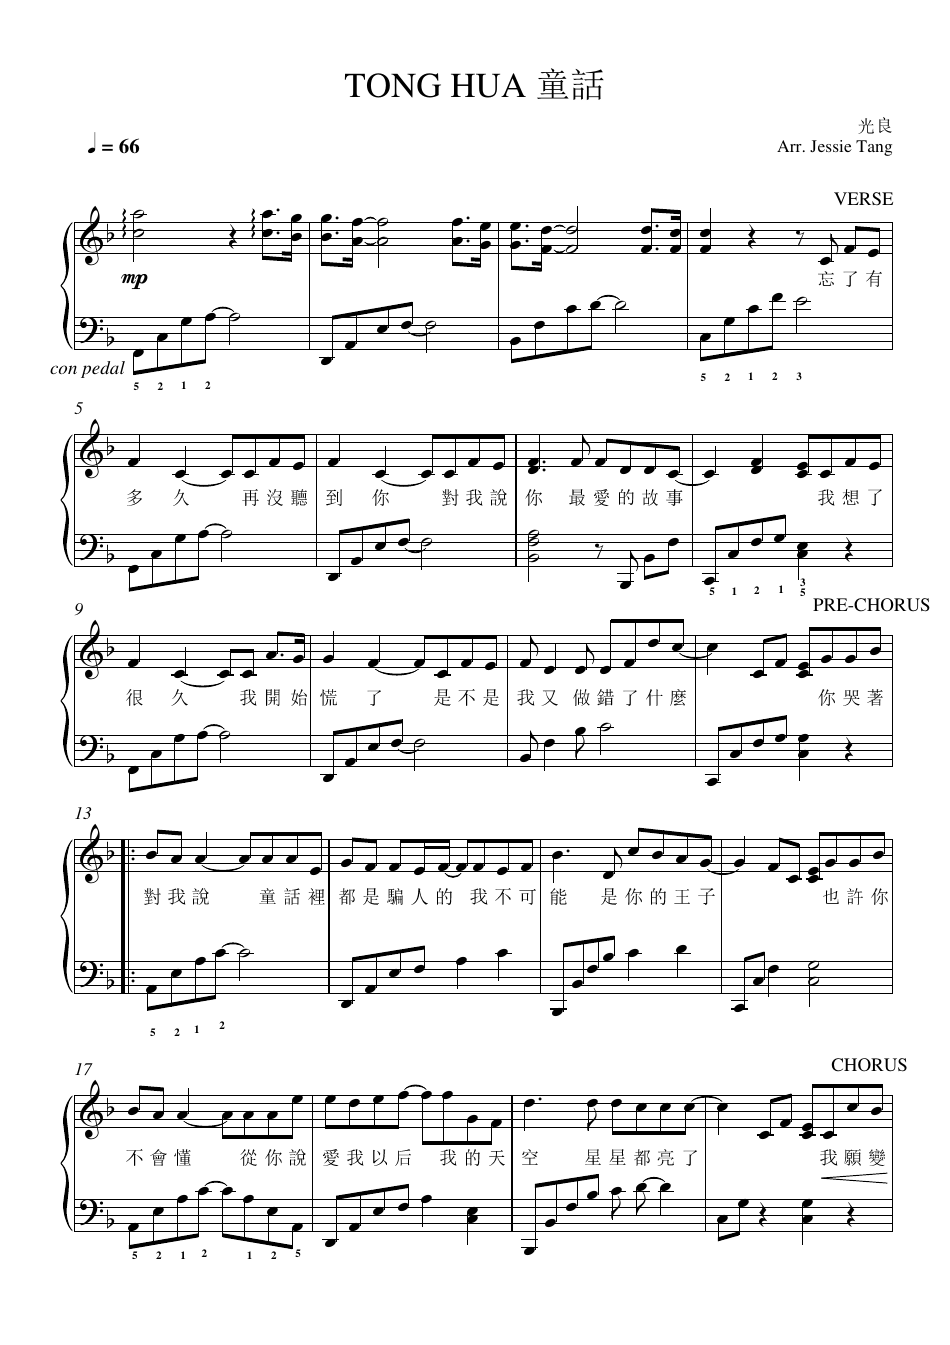 Tong Hua - Piano Sheet Music for the Arr. by Jessie Tang | TemplateRoller